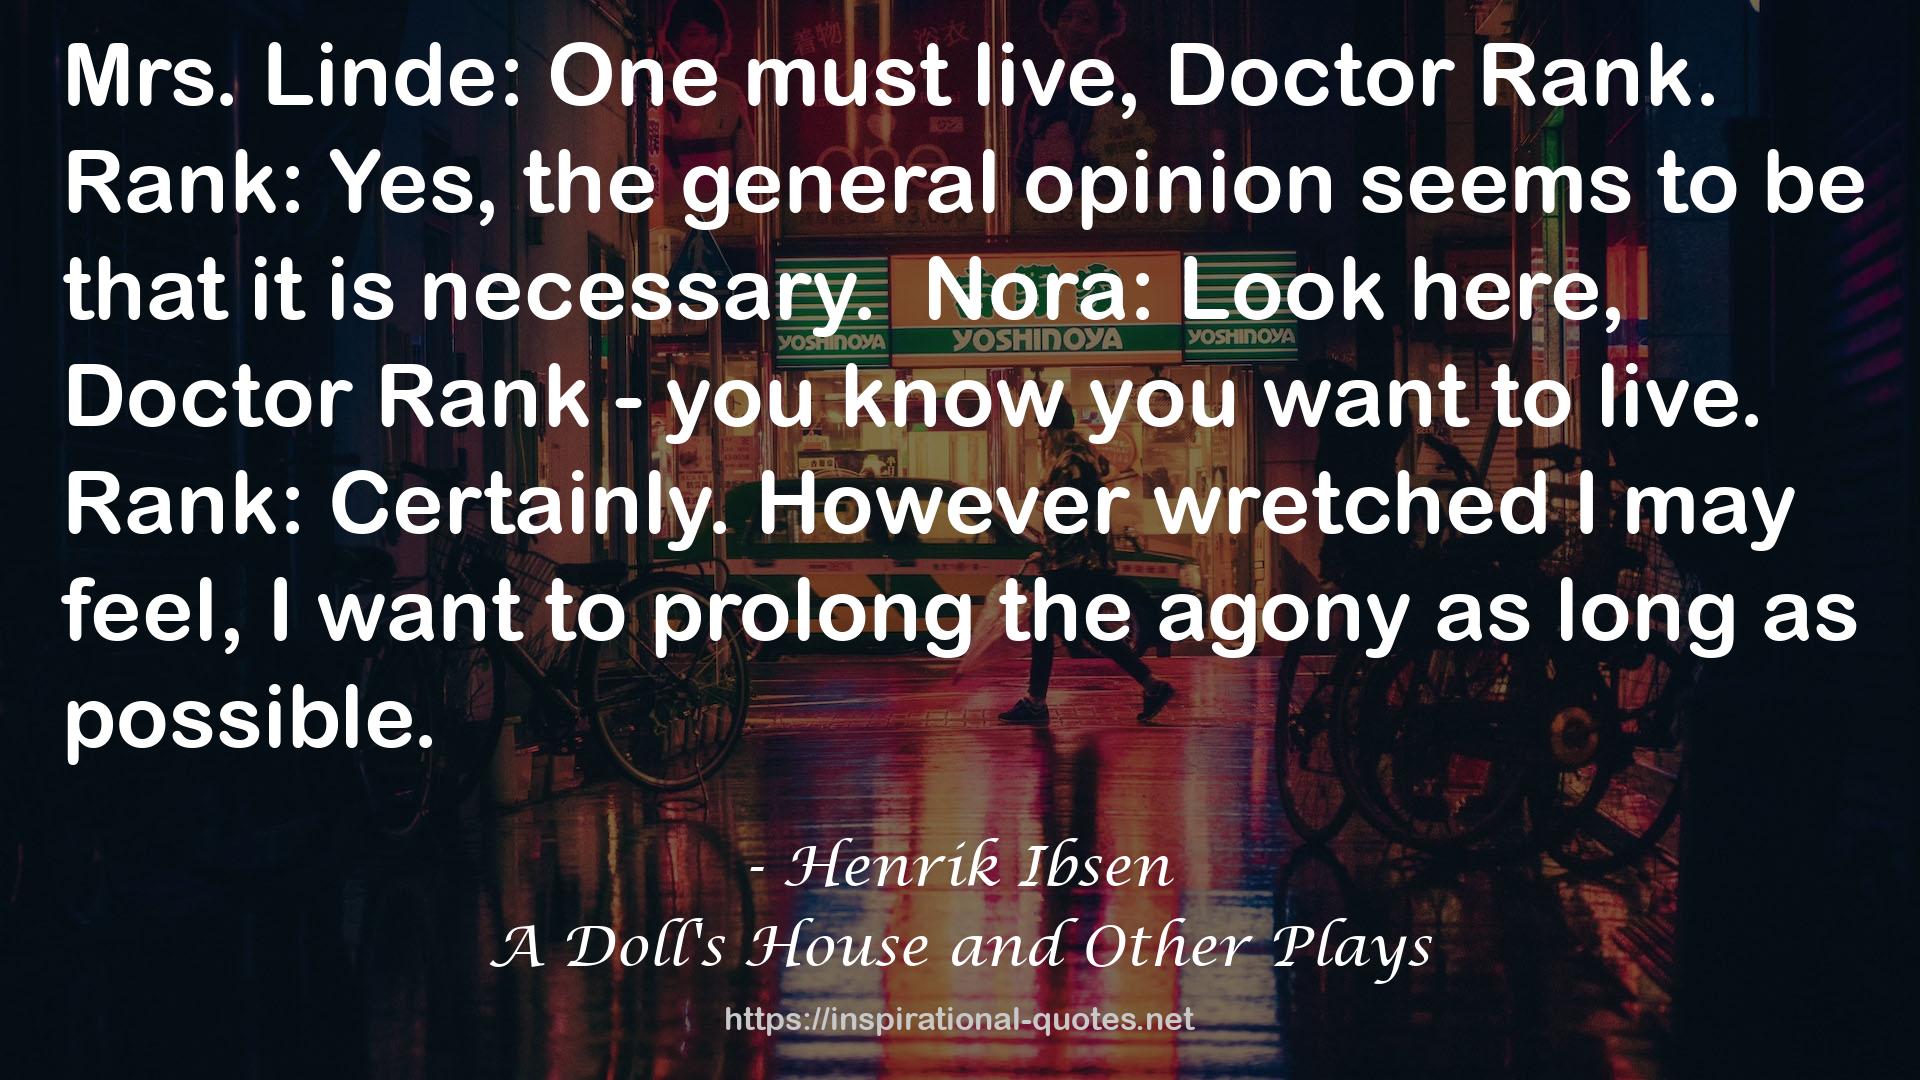 A Doll's House and Other Plays QUOTES